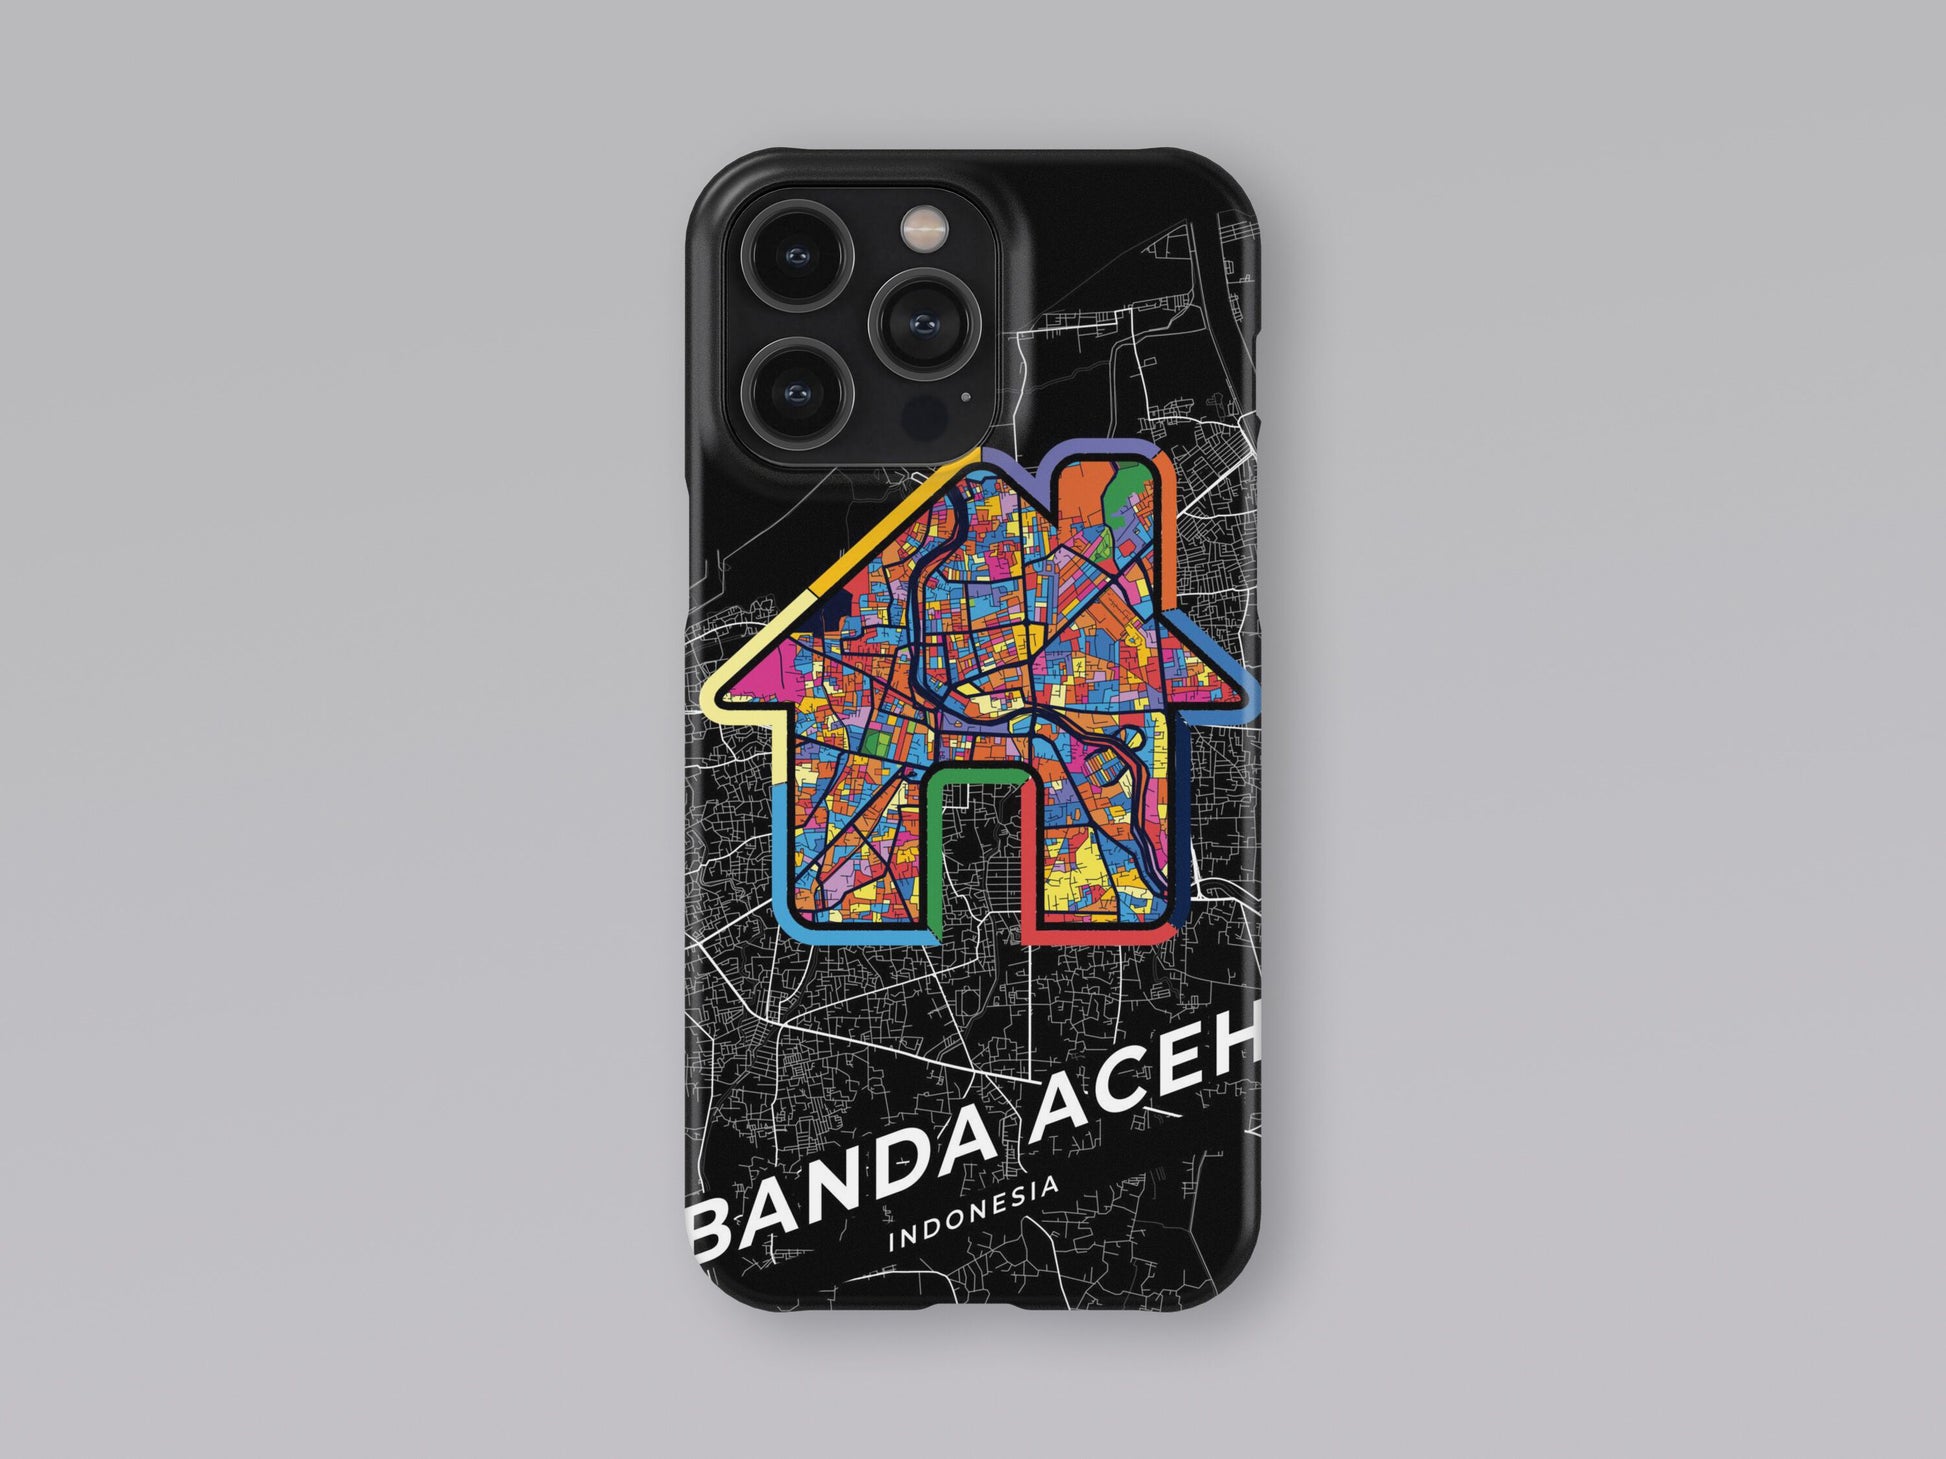 Banda Aceh Indonesia slim phone case with colorful icon. Birthday, wedding or housewarming gift. Couple match cases. 3